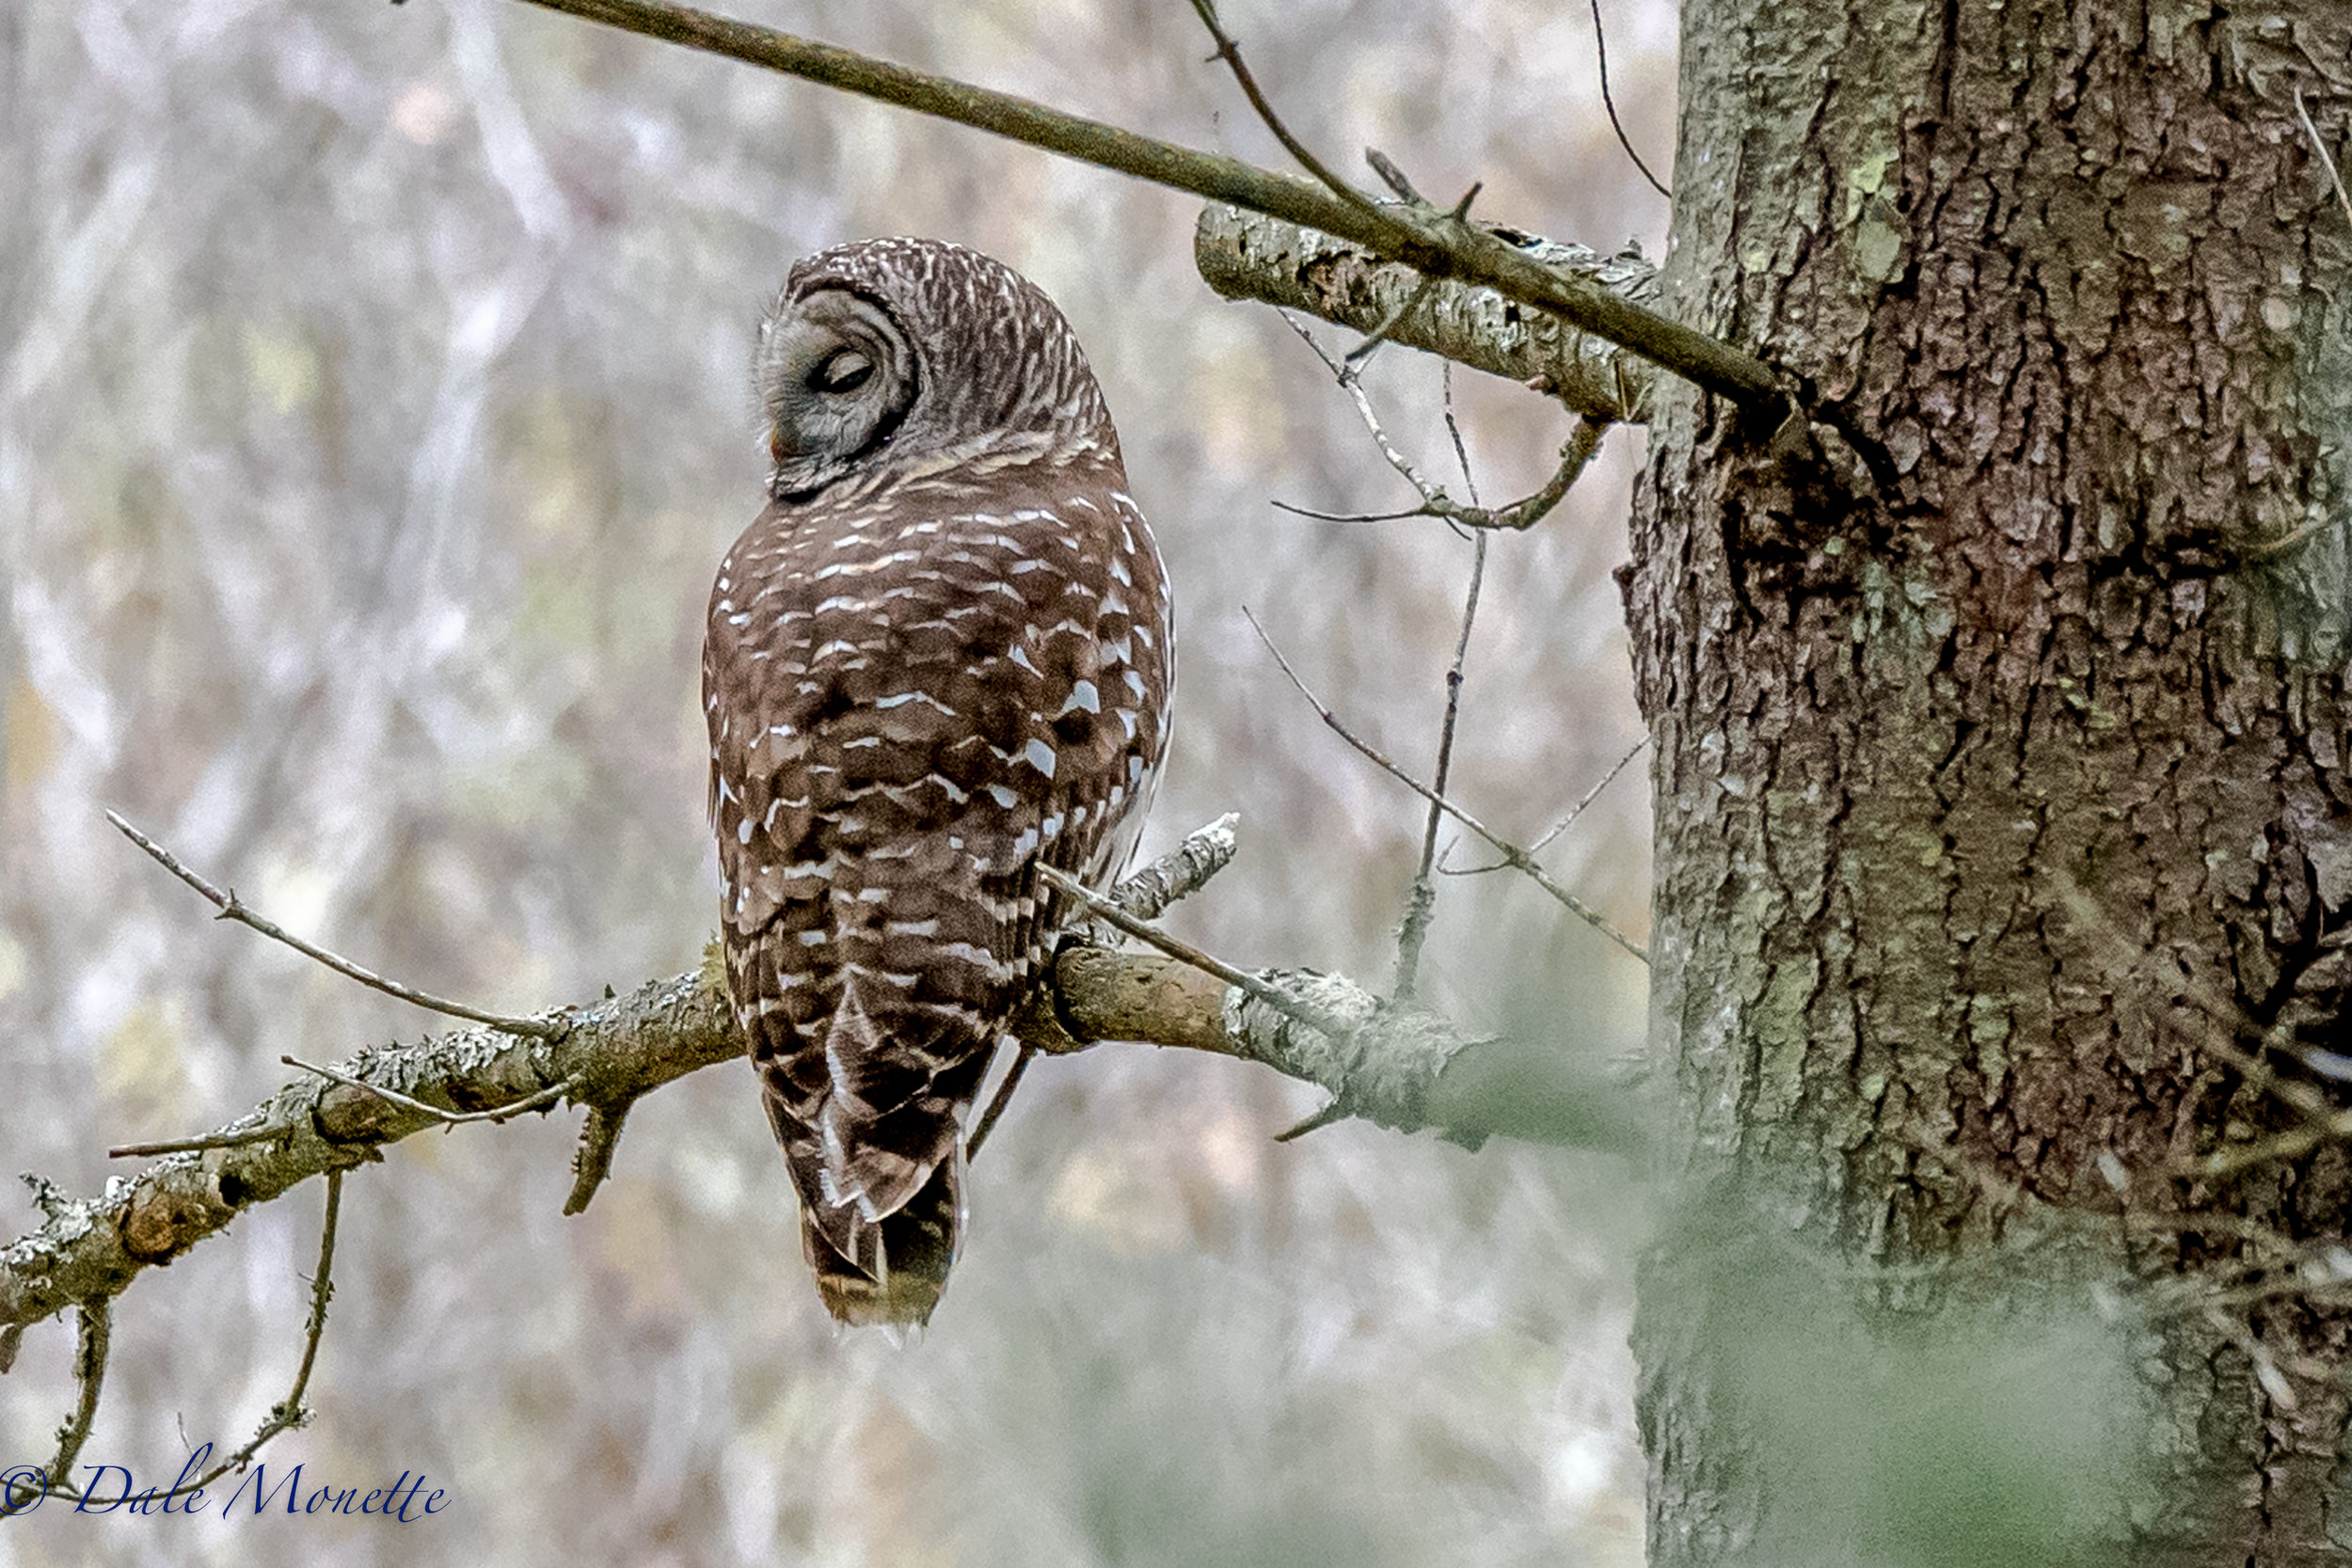   I spotted this barred owl hunting along the edge of a small swamp. &nbsp;I watched him hunt and took a few photos and left him to find his breakfast without disturbing him. &nbsp;Notice his head is almost 180 degrees around ! 10/29/16  